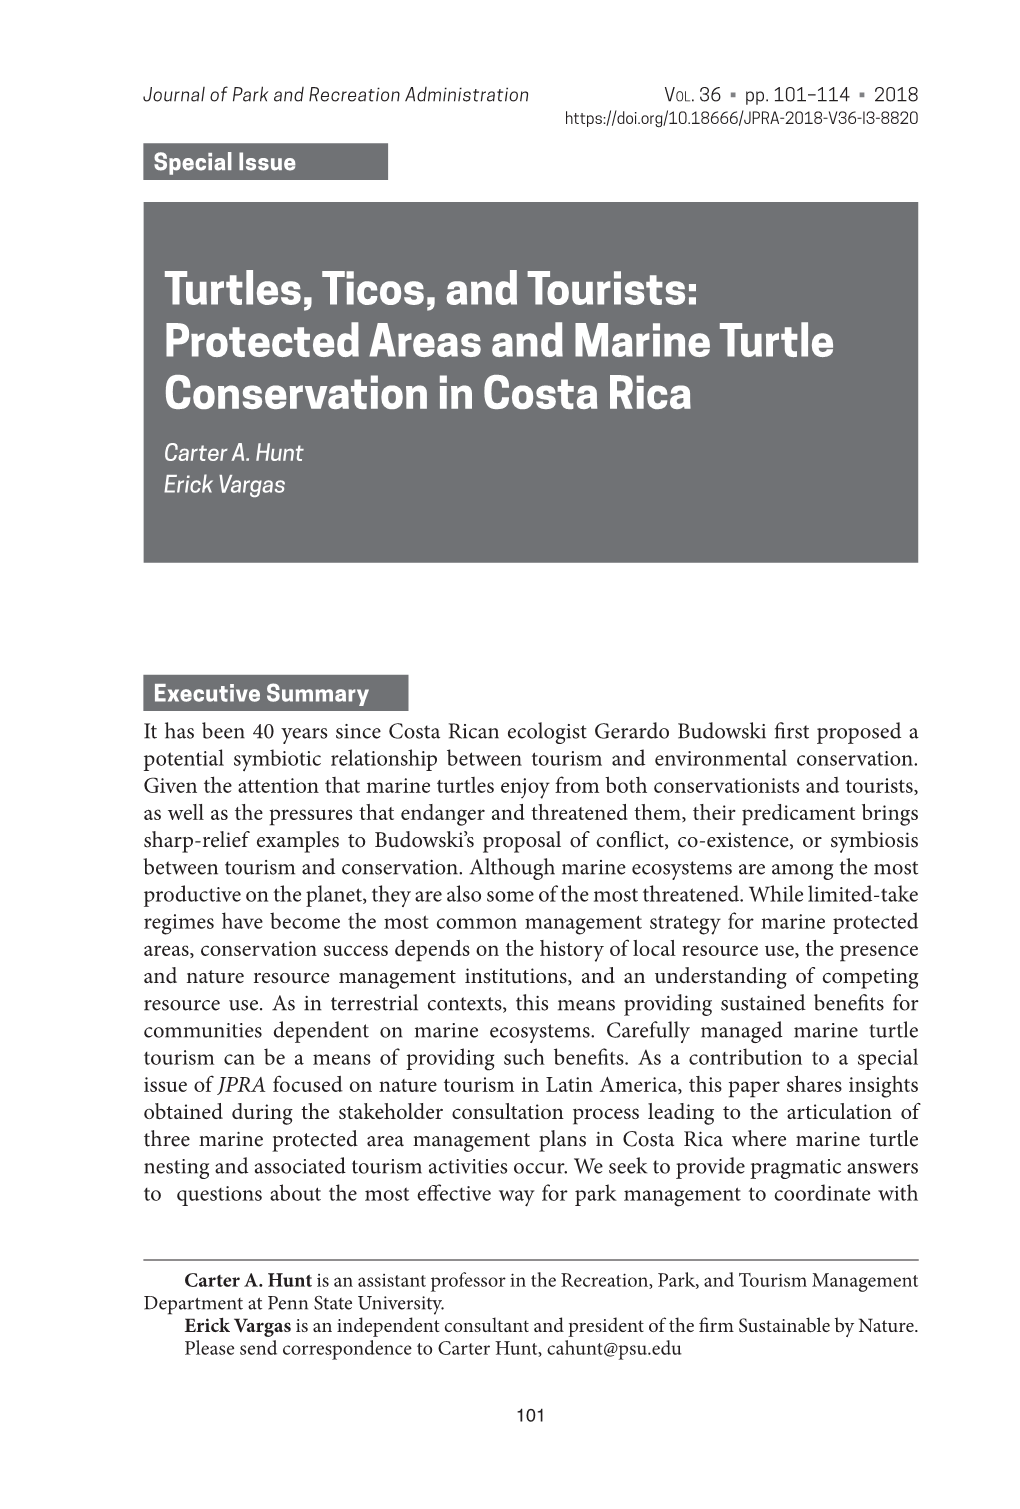 Turtles, Ticos, and Tourists: Protected Areas and Marine Turtle Conservation in Costa Rica